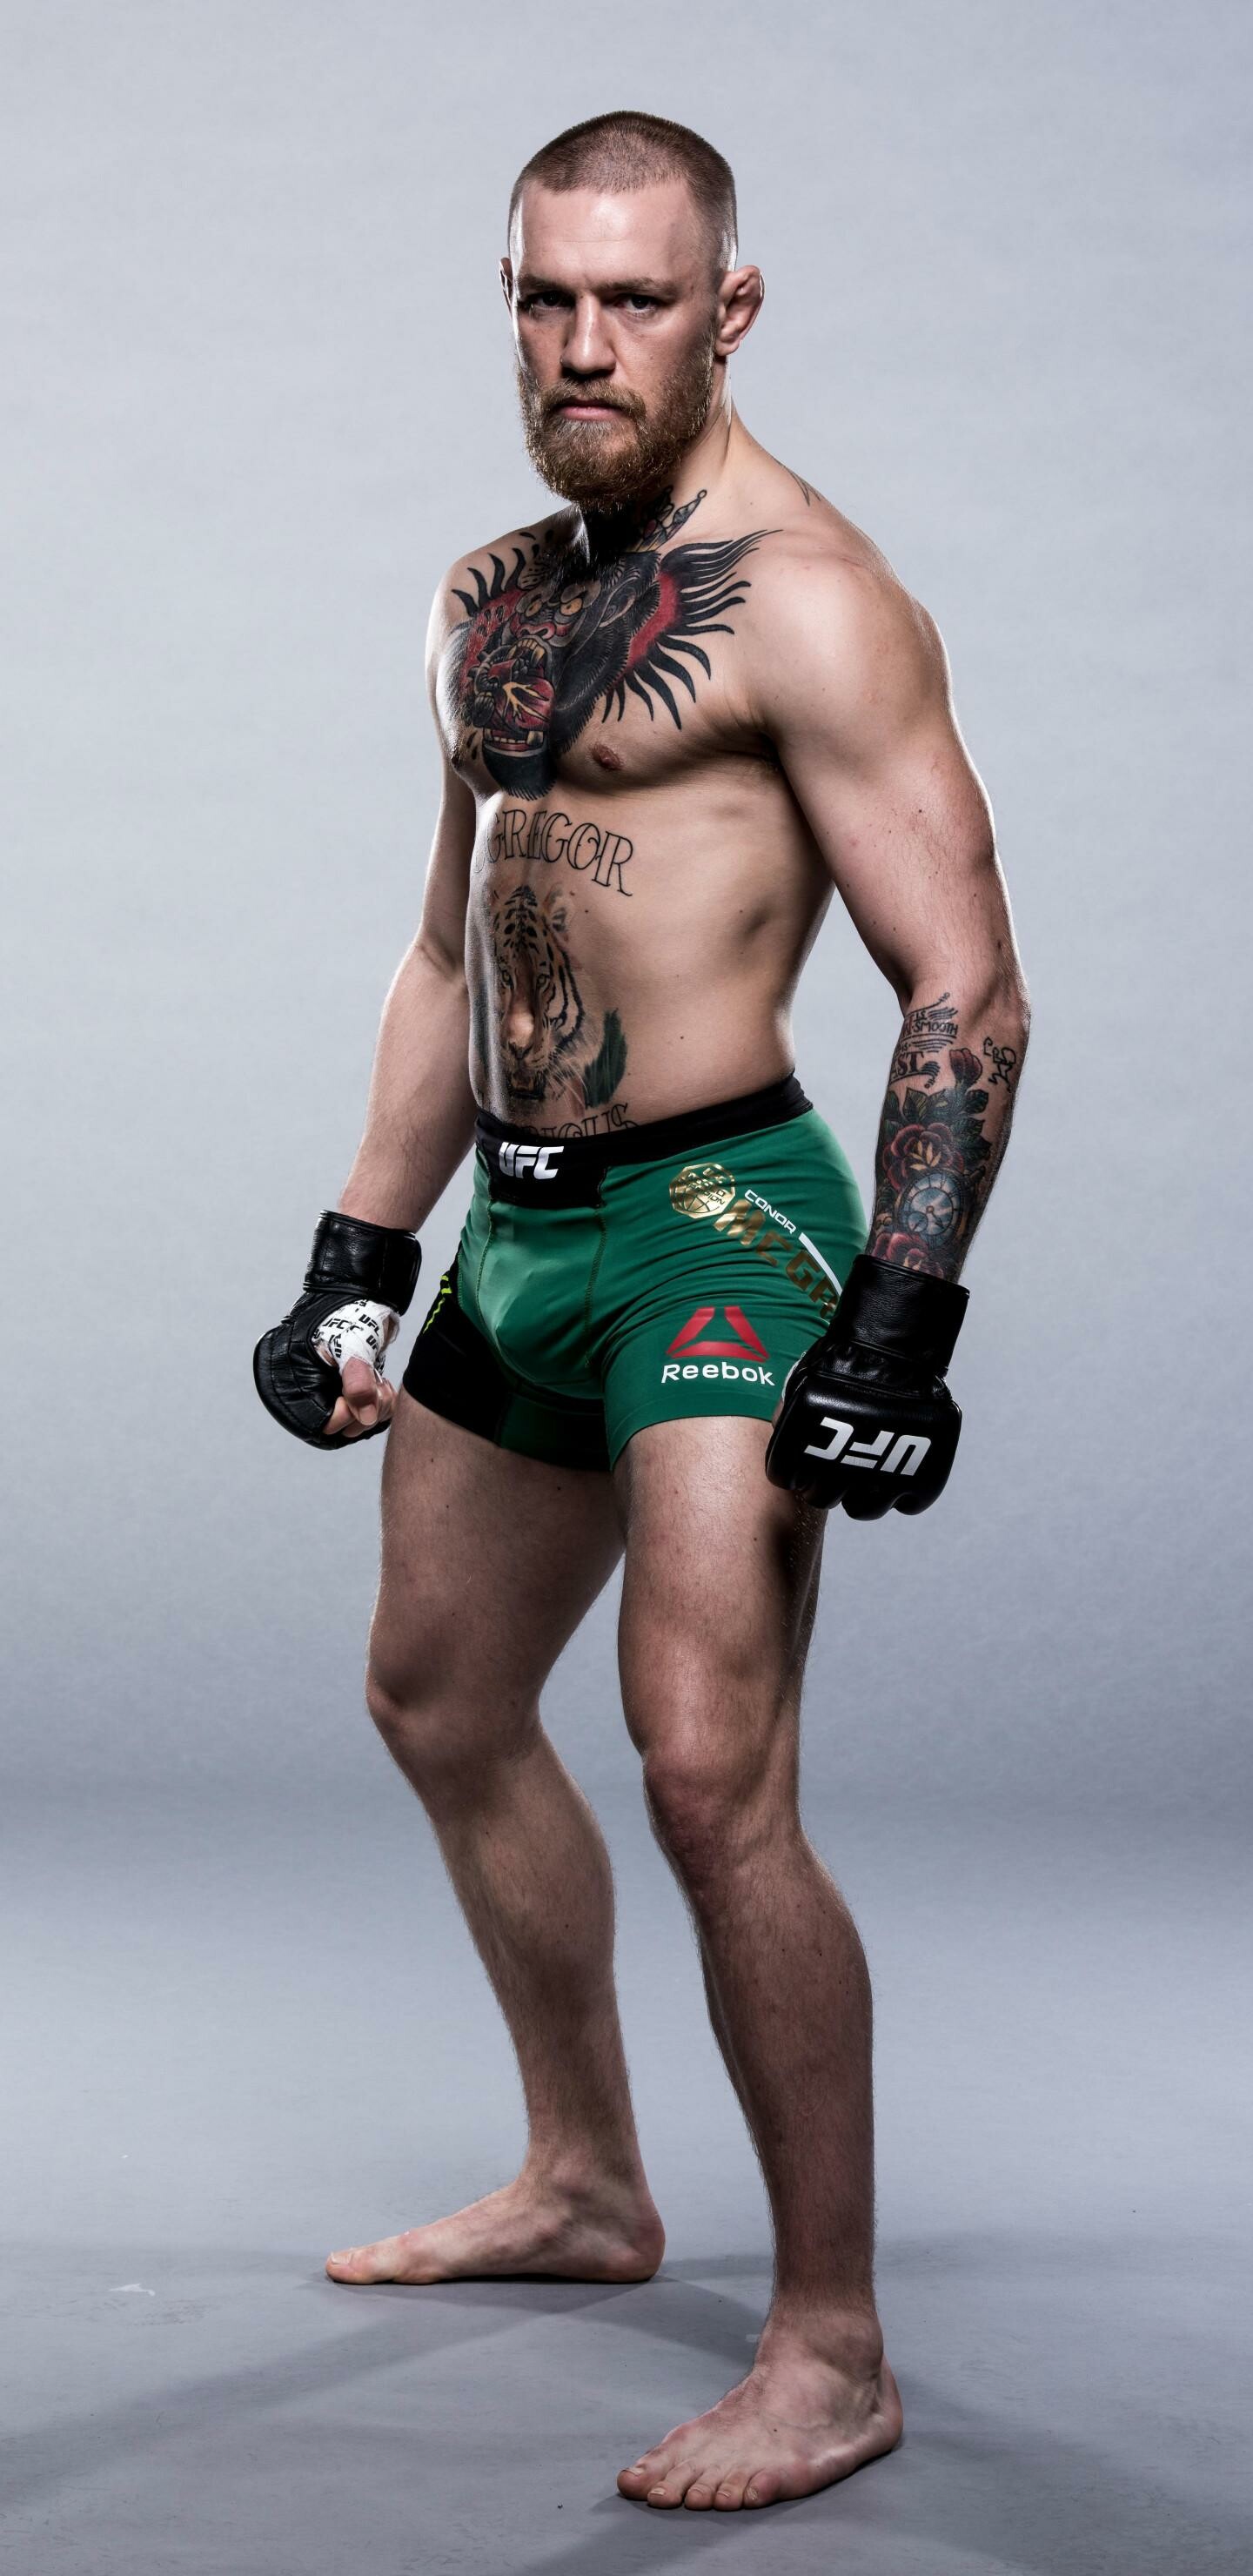 Conor McGregor: He had his first professional MMA bout, defeating Gary Morris on 9 March 2008. 1440x2960 HD Wallpaper.